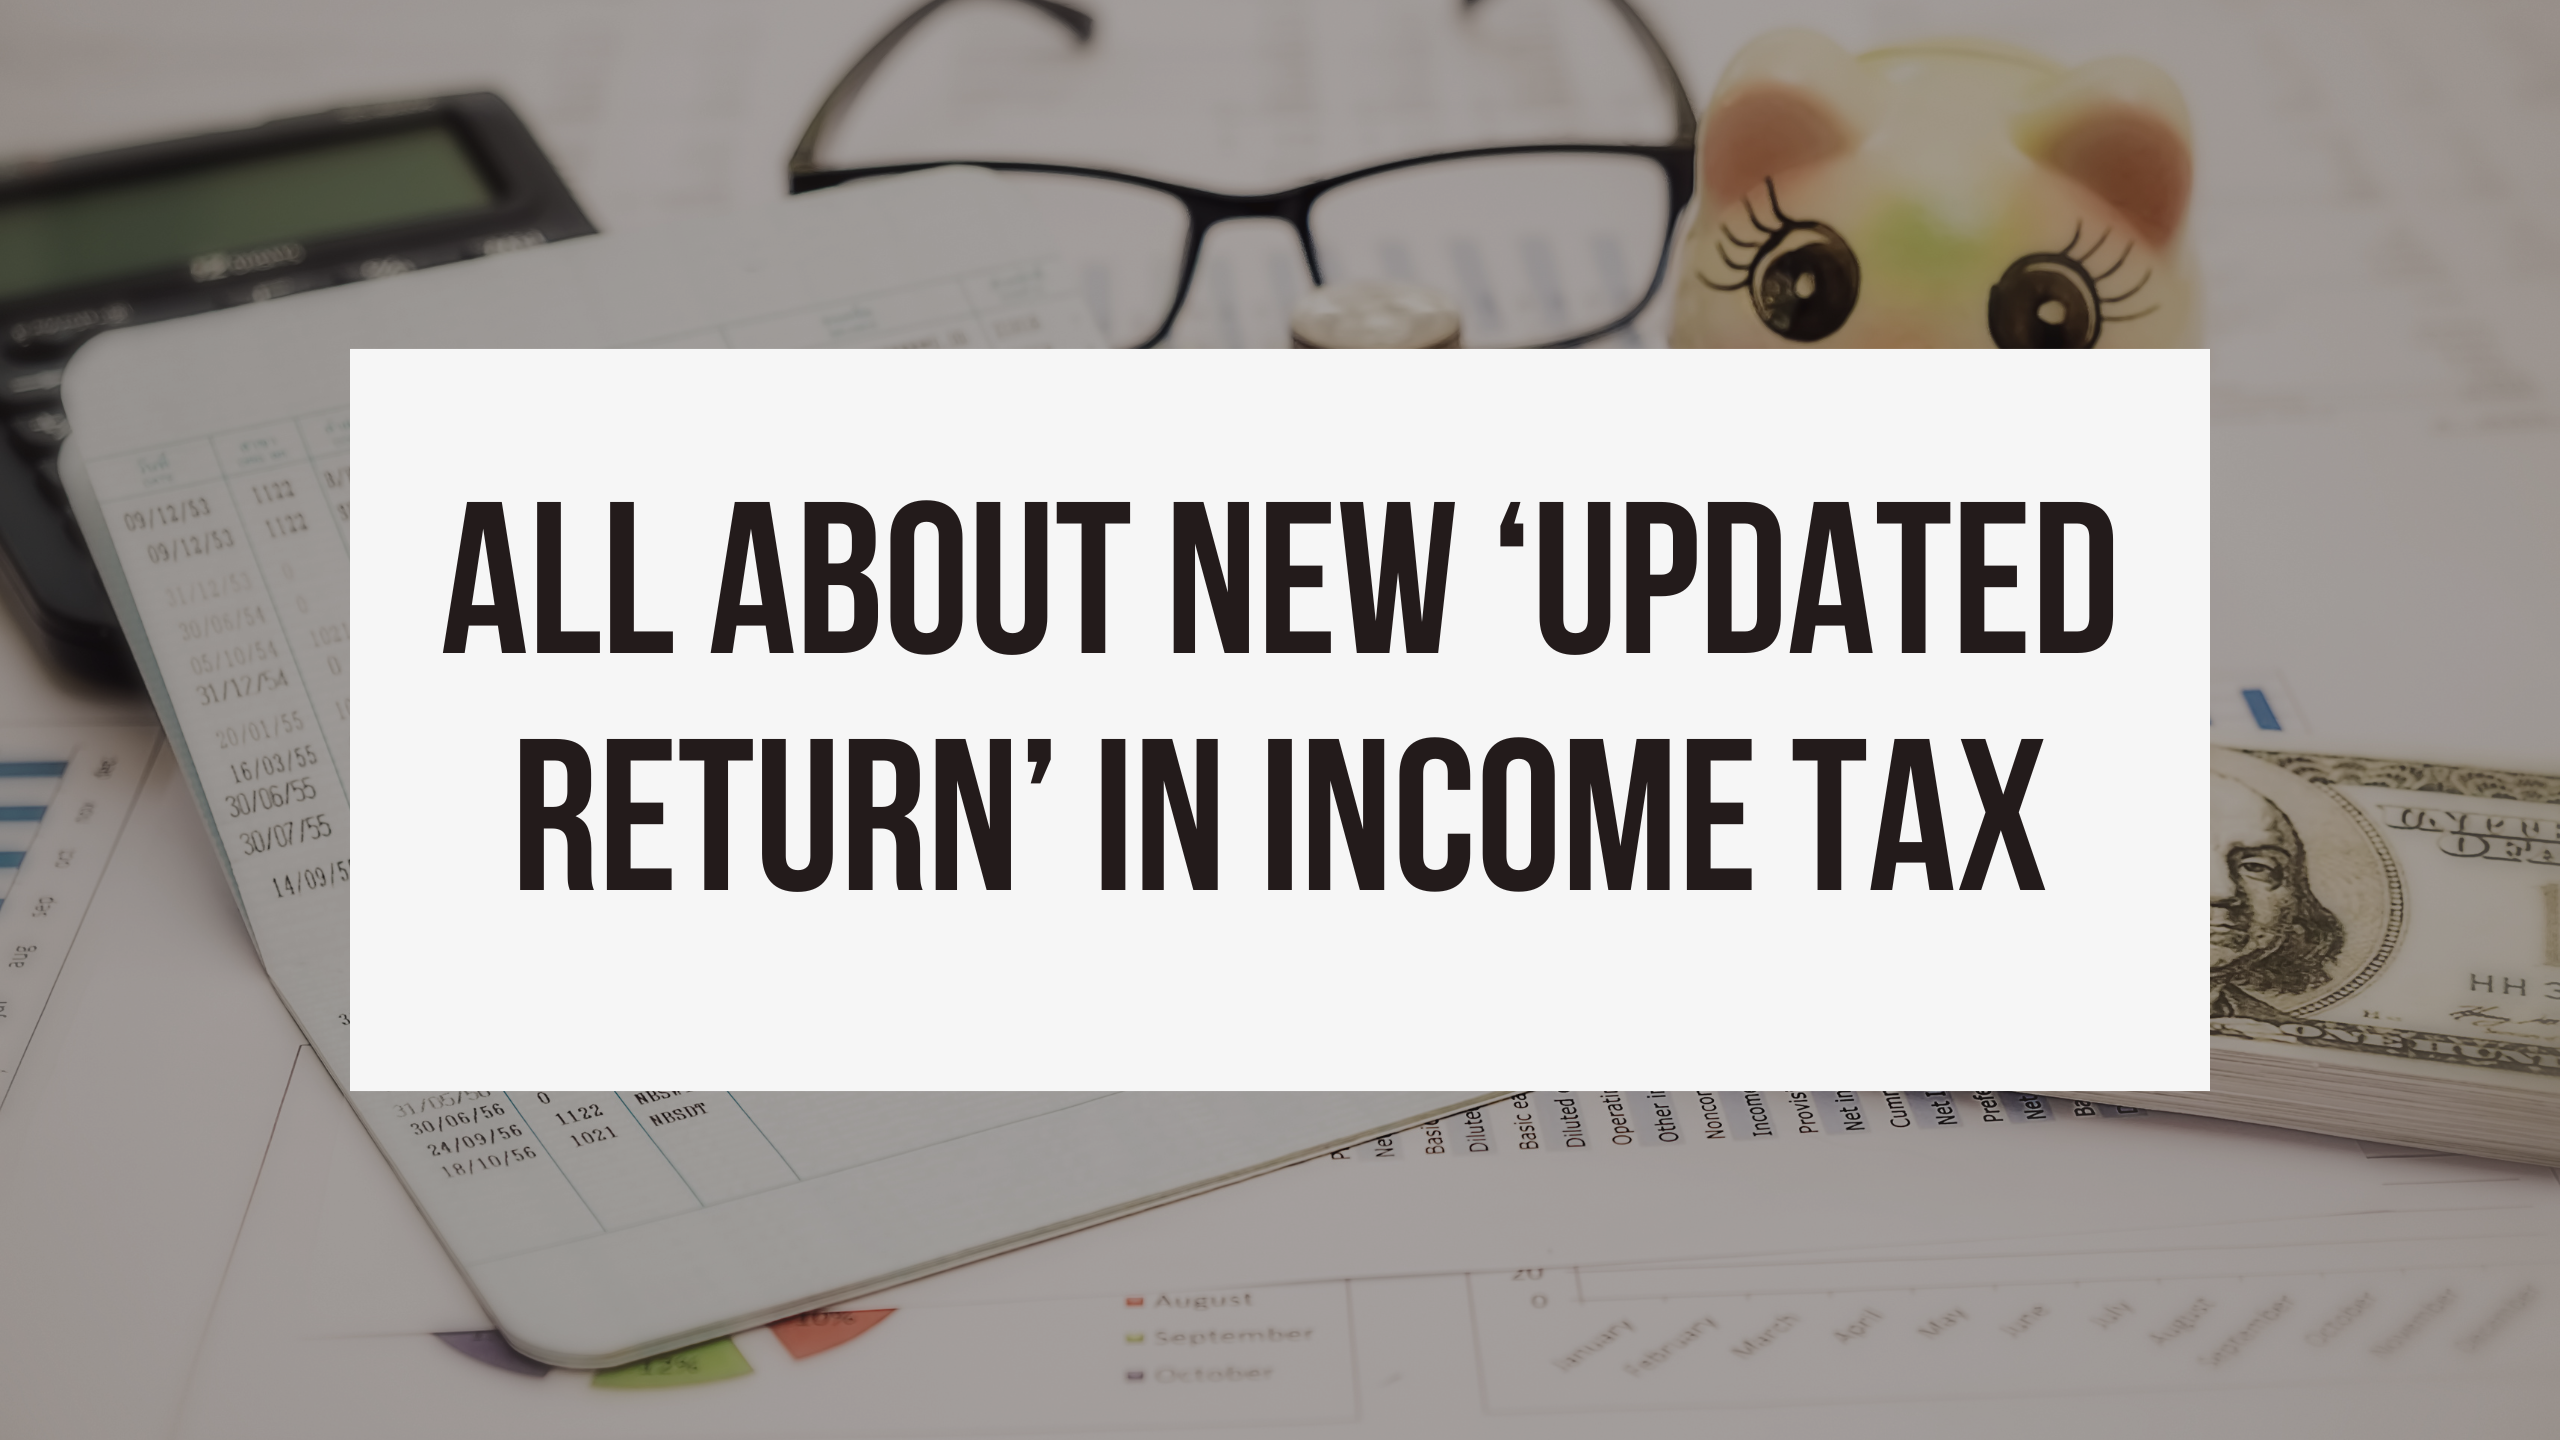 All about new ‘Updated Return’ in Income tax